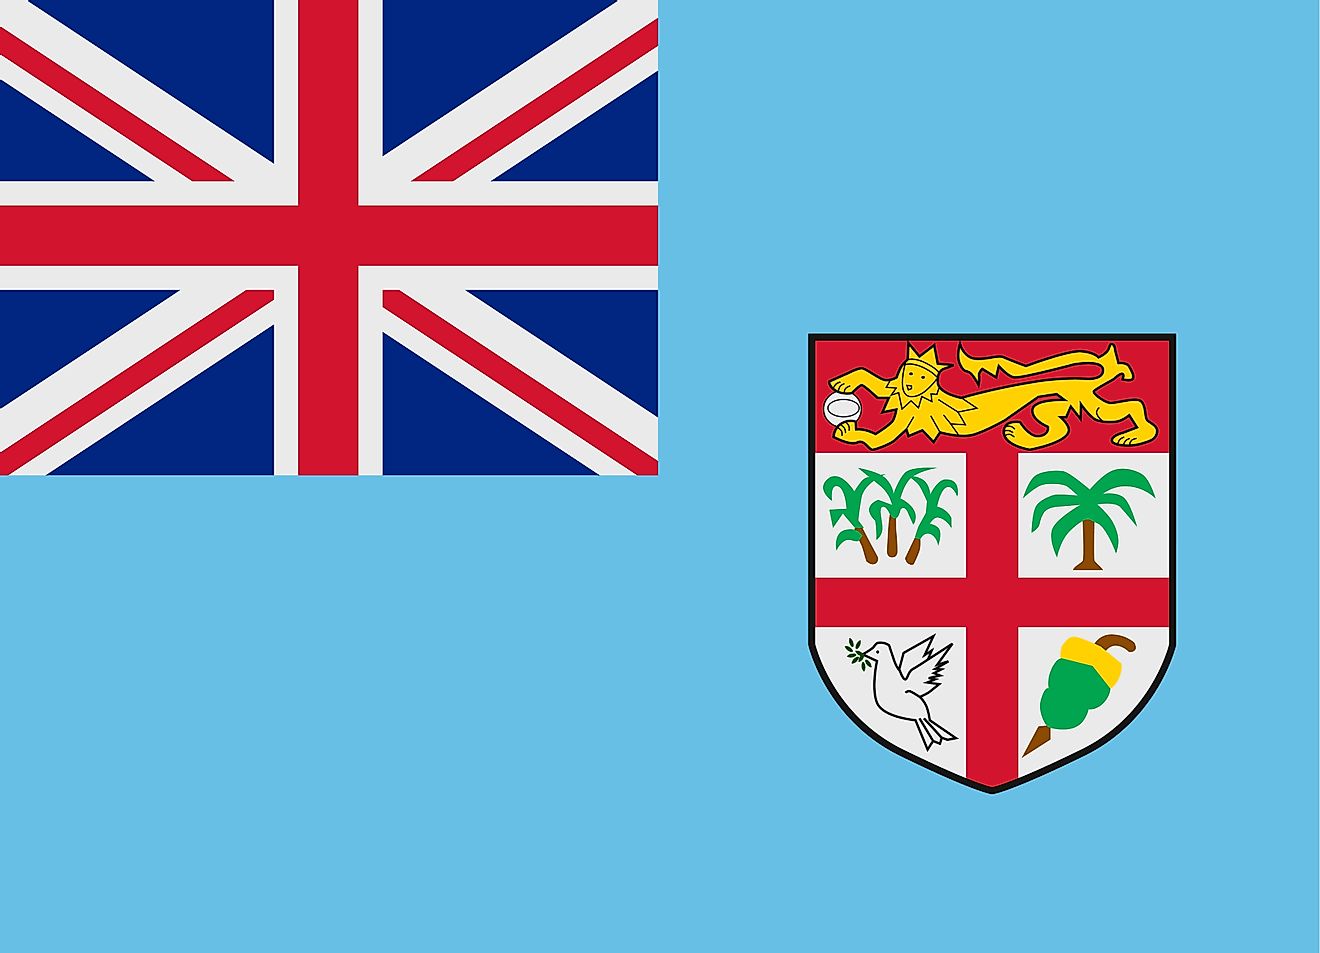 Flag of Fiji has a light blue background and features the British Union Jack on the upper hoist-side and a shield on the fly side.